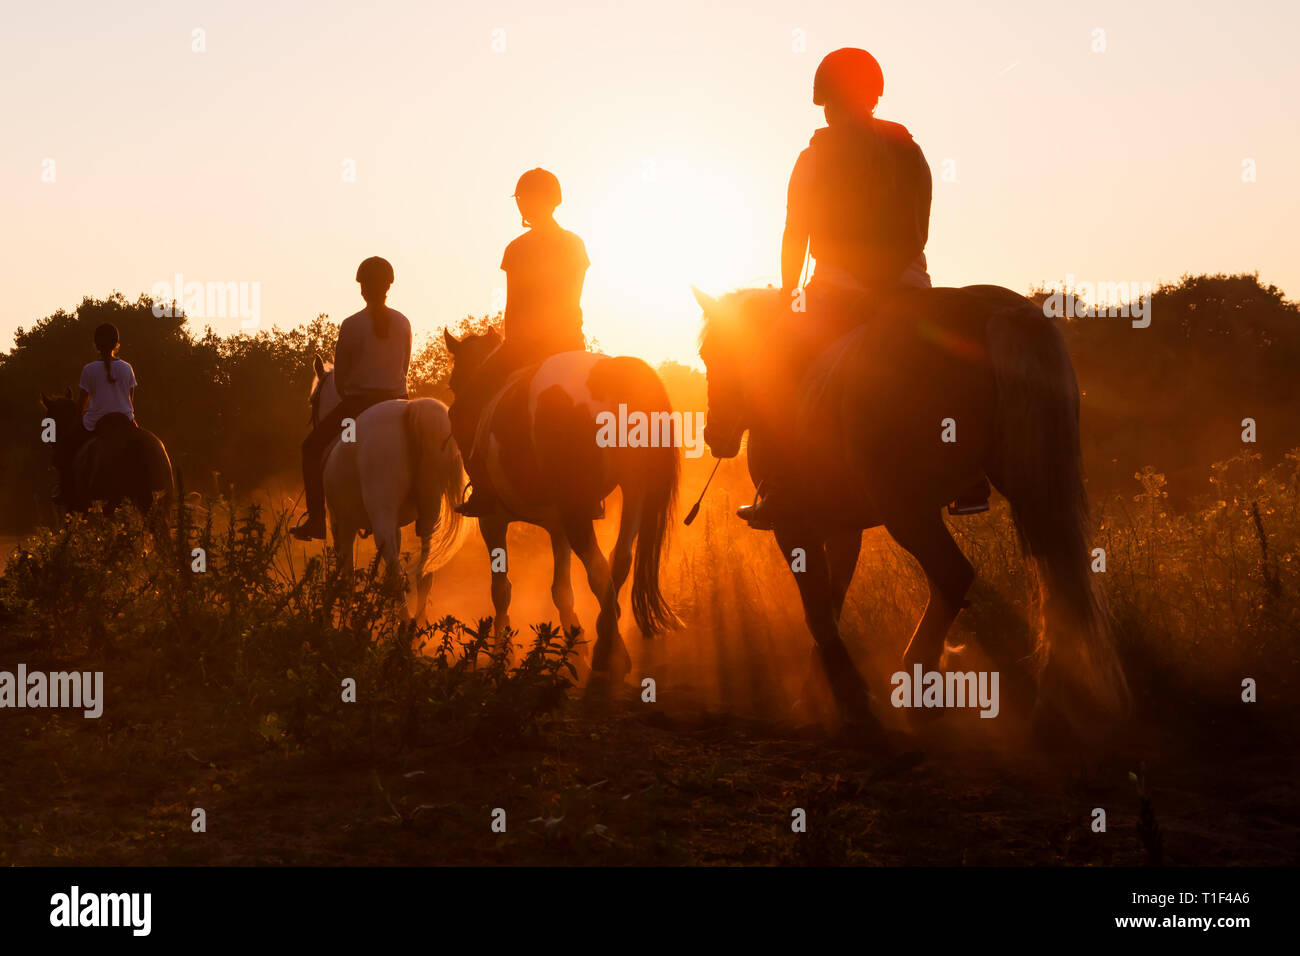 THE HAGUE - People riding horses at sunset in the dunes. Stock Photo